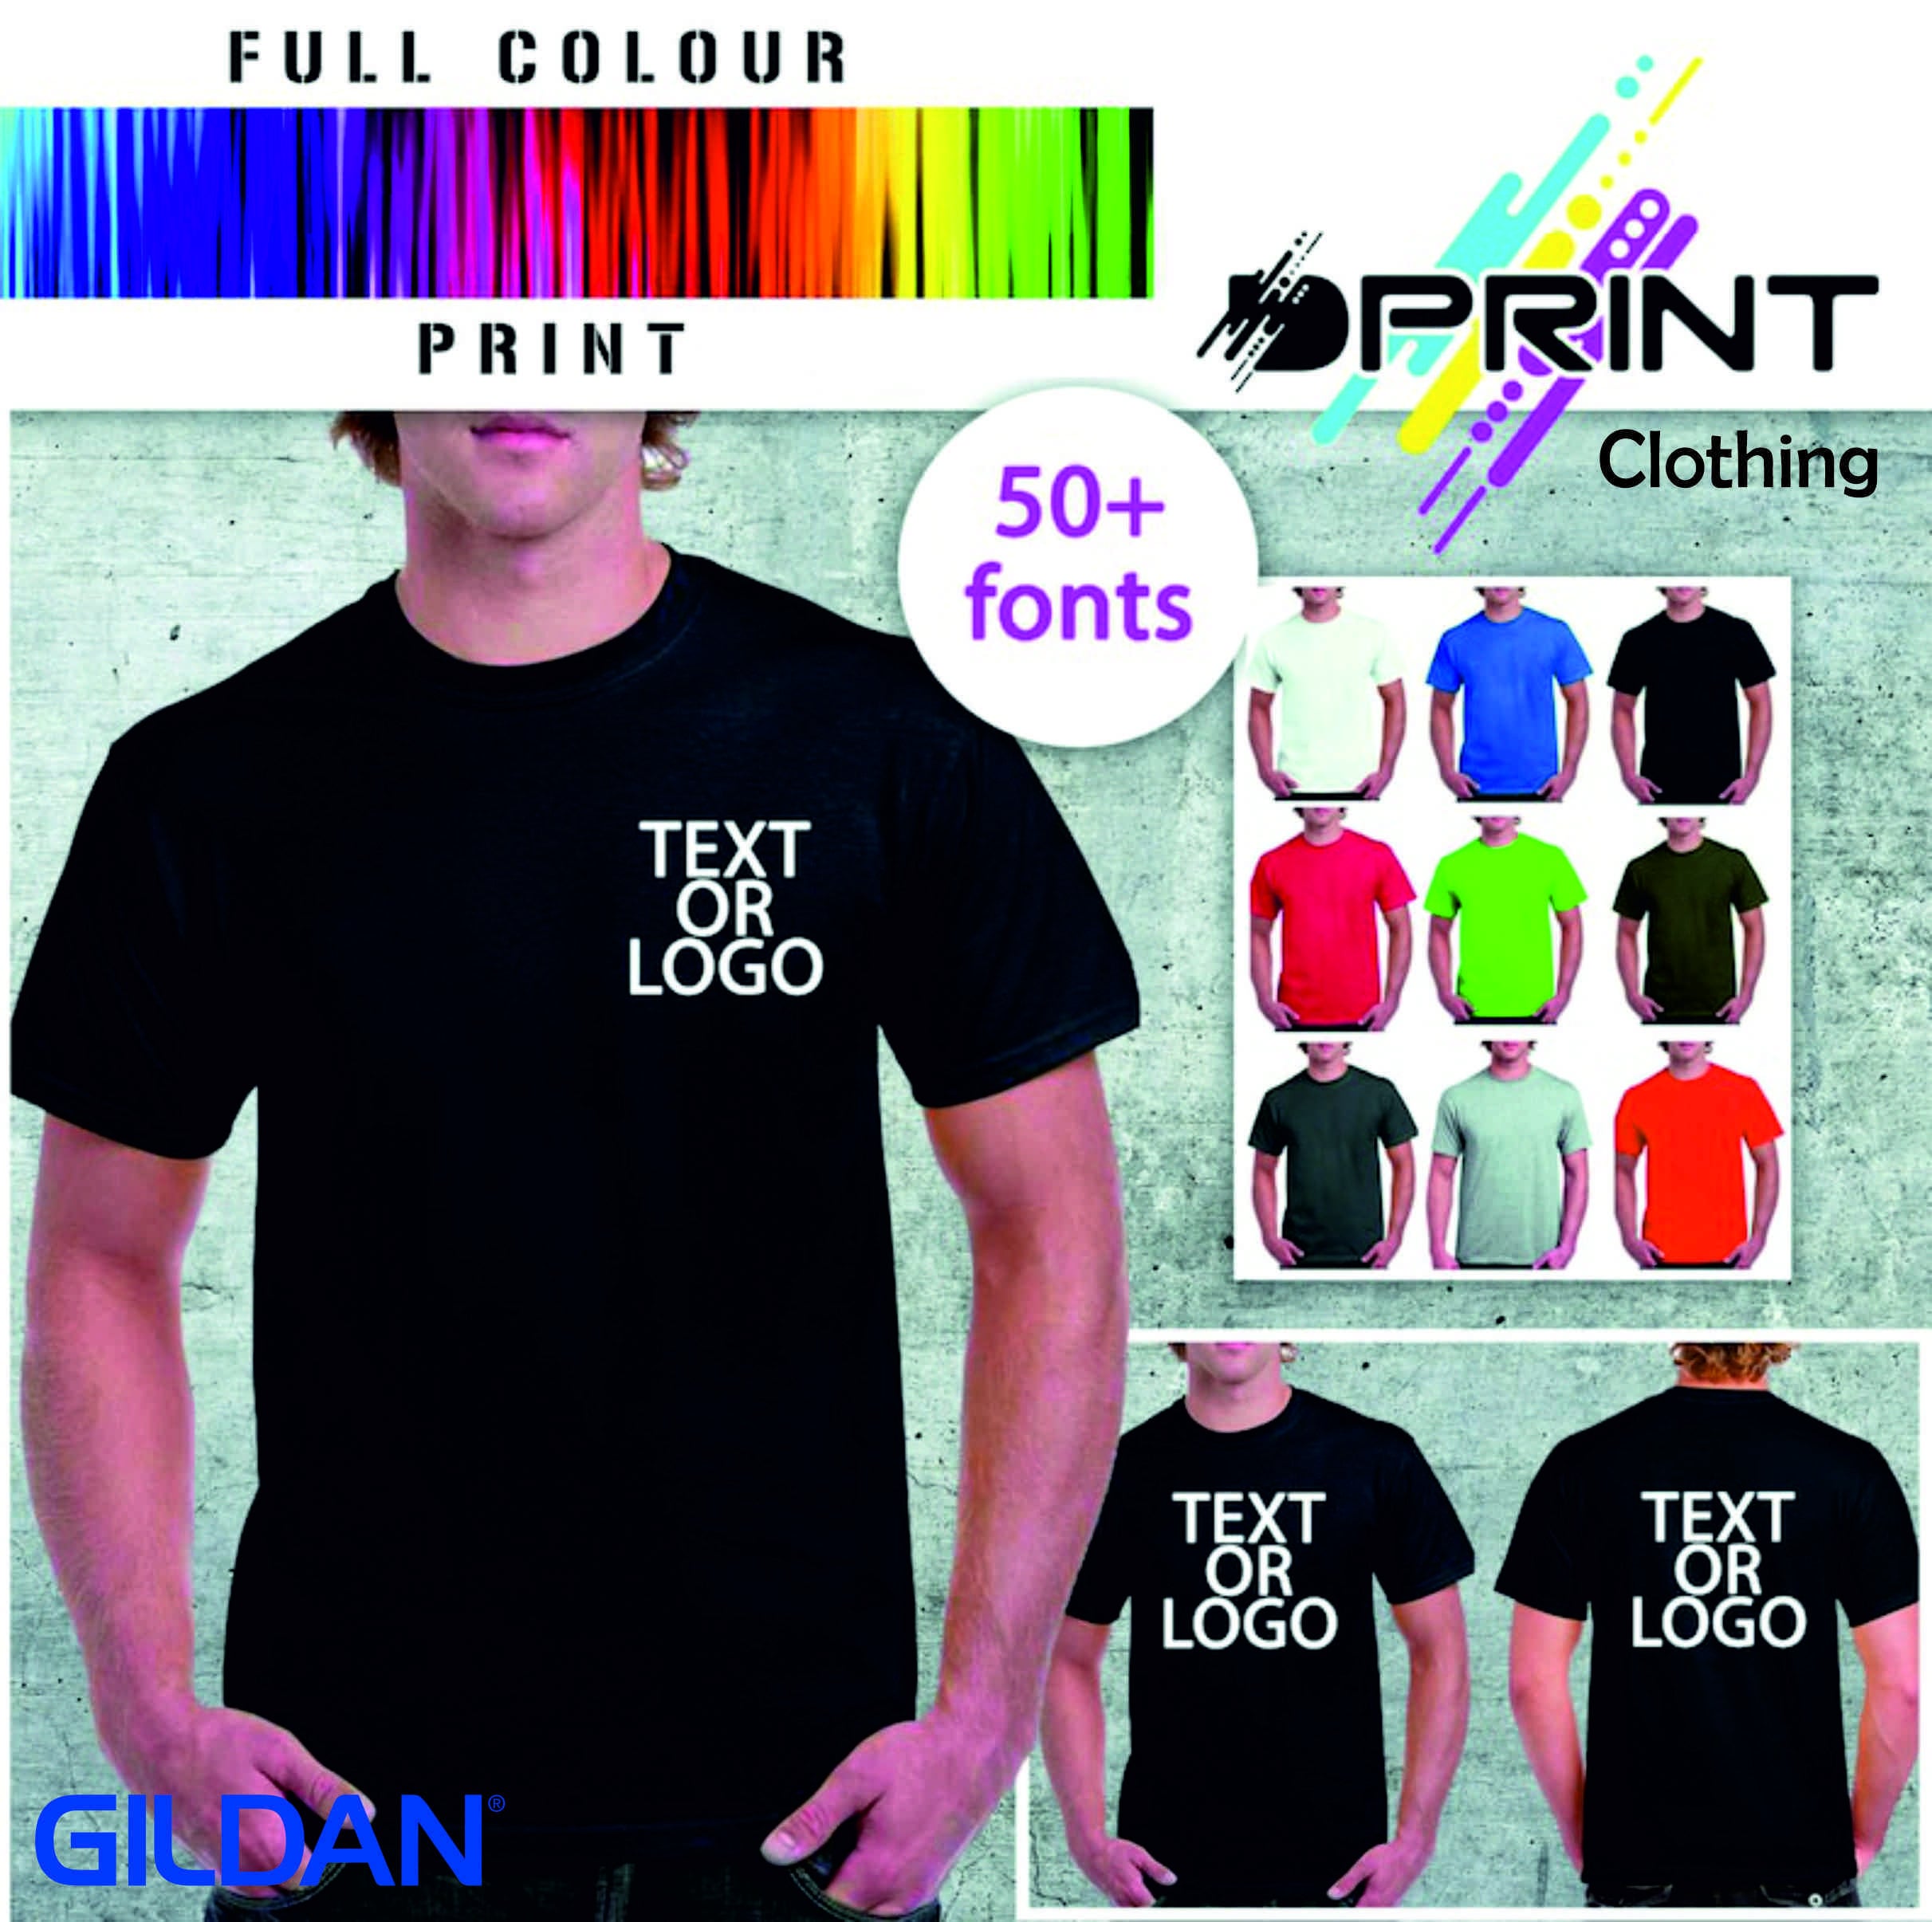 Bulk Prices, Customize Your Own Shirt With Text, WHOLESALE T-shirts, Personalized  T-shirt, Custom Text, Custom Text, T-shirt Design Bundle 